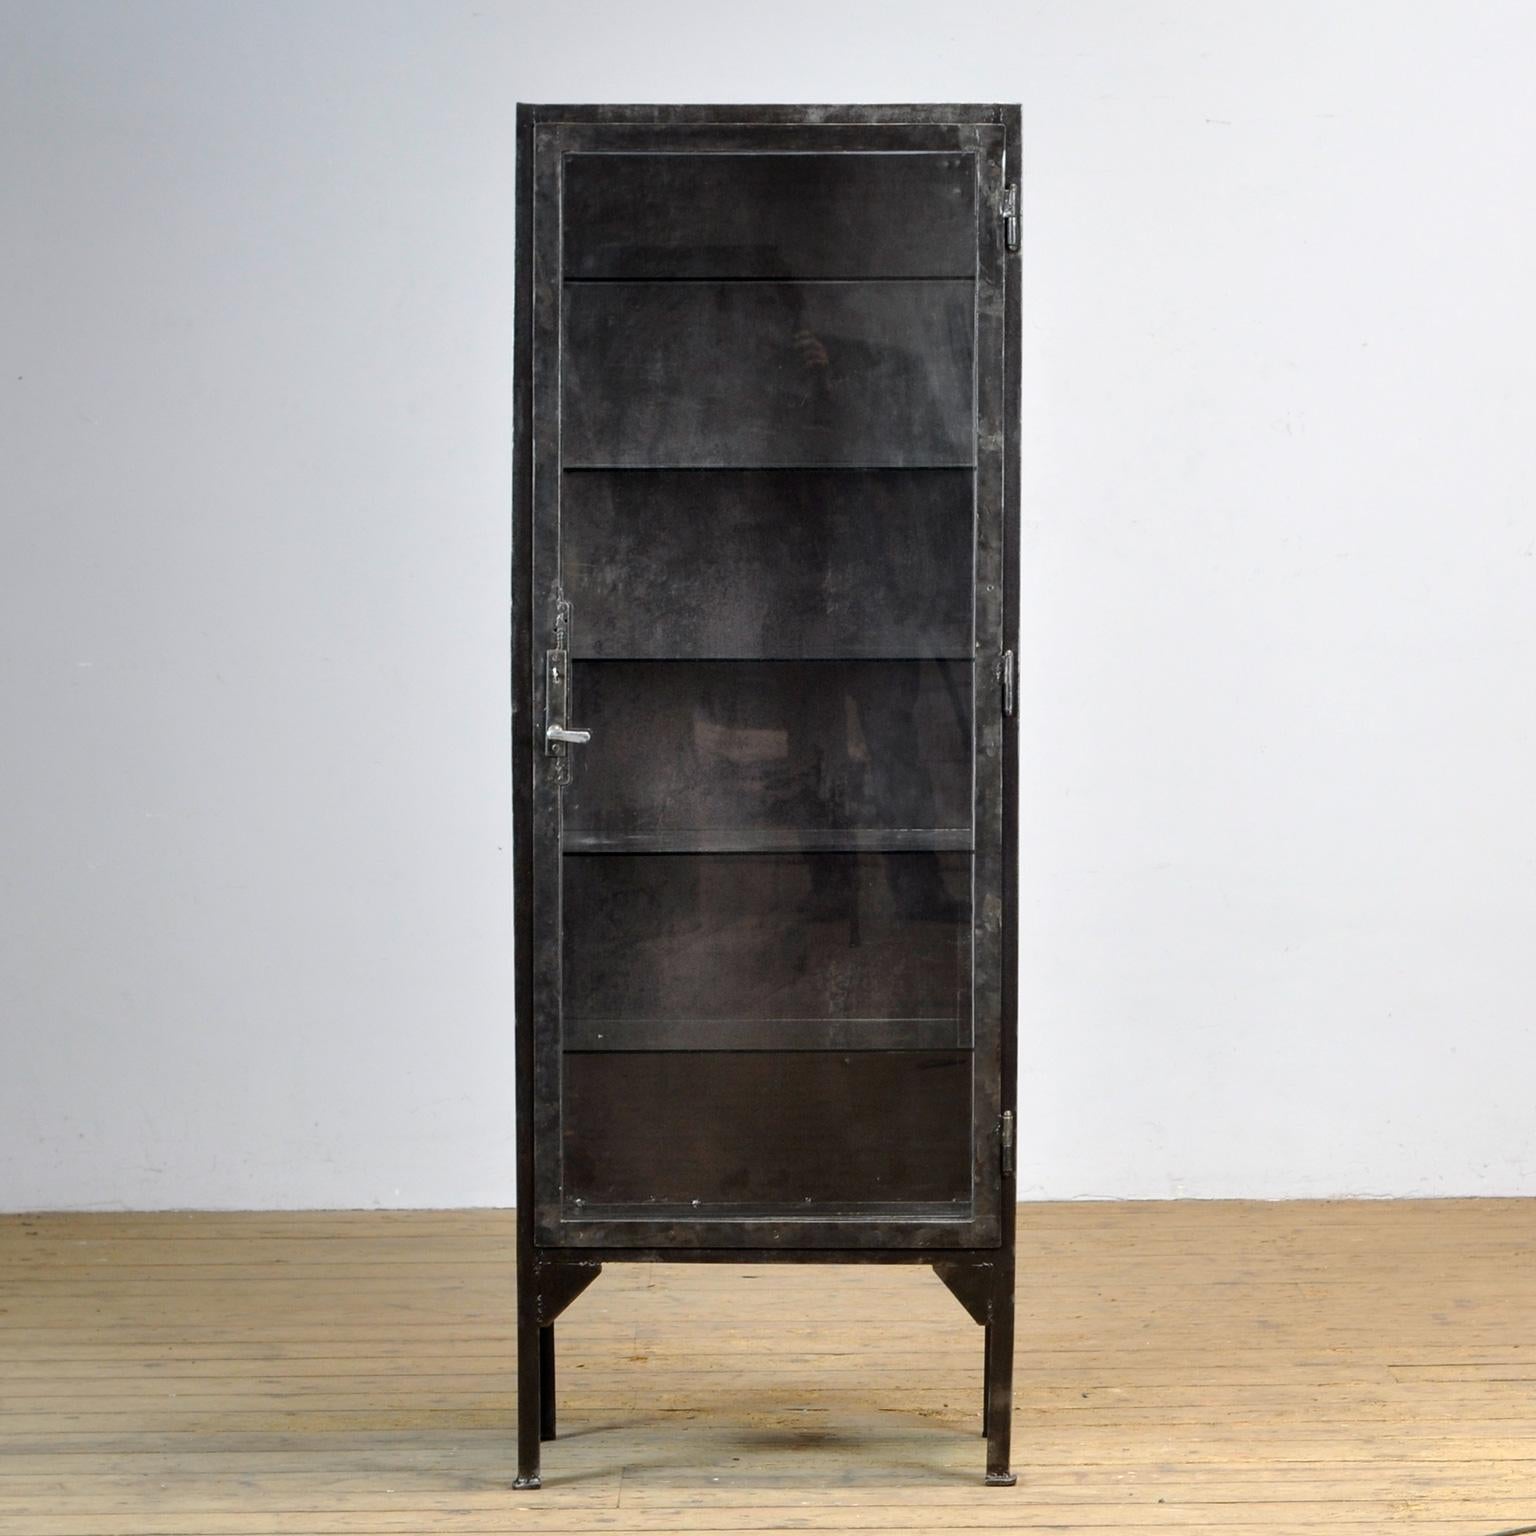 Medical cabinet from the 1930s. The cabinet is produced in Hungary and is made of thick iron and glass. The case has been stripped to the metal and treated against rust. With five glass shelves. The lock and handle are functional.